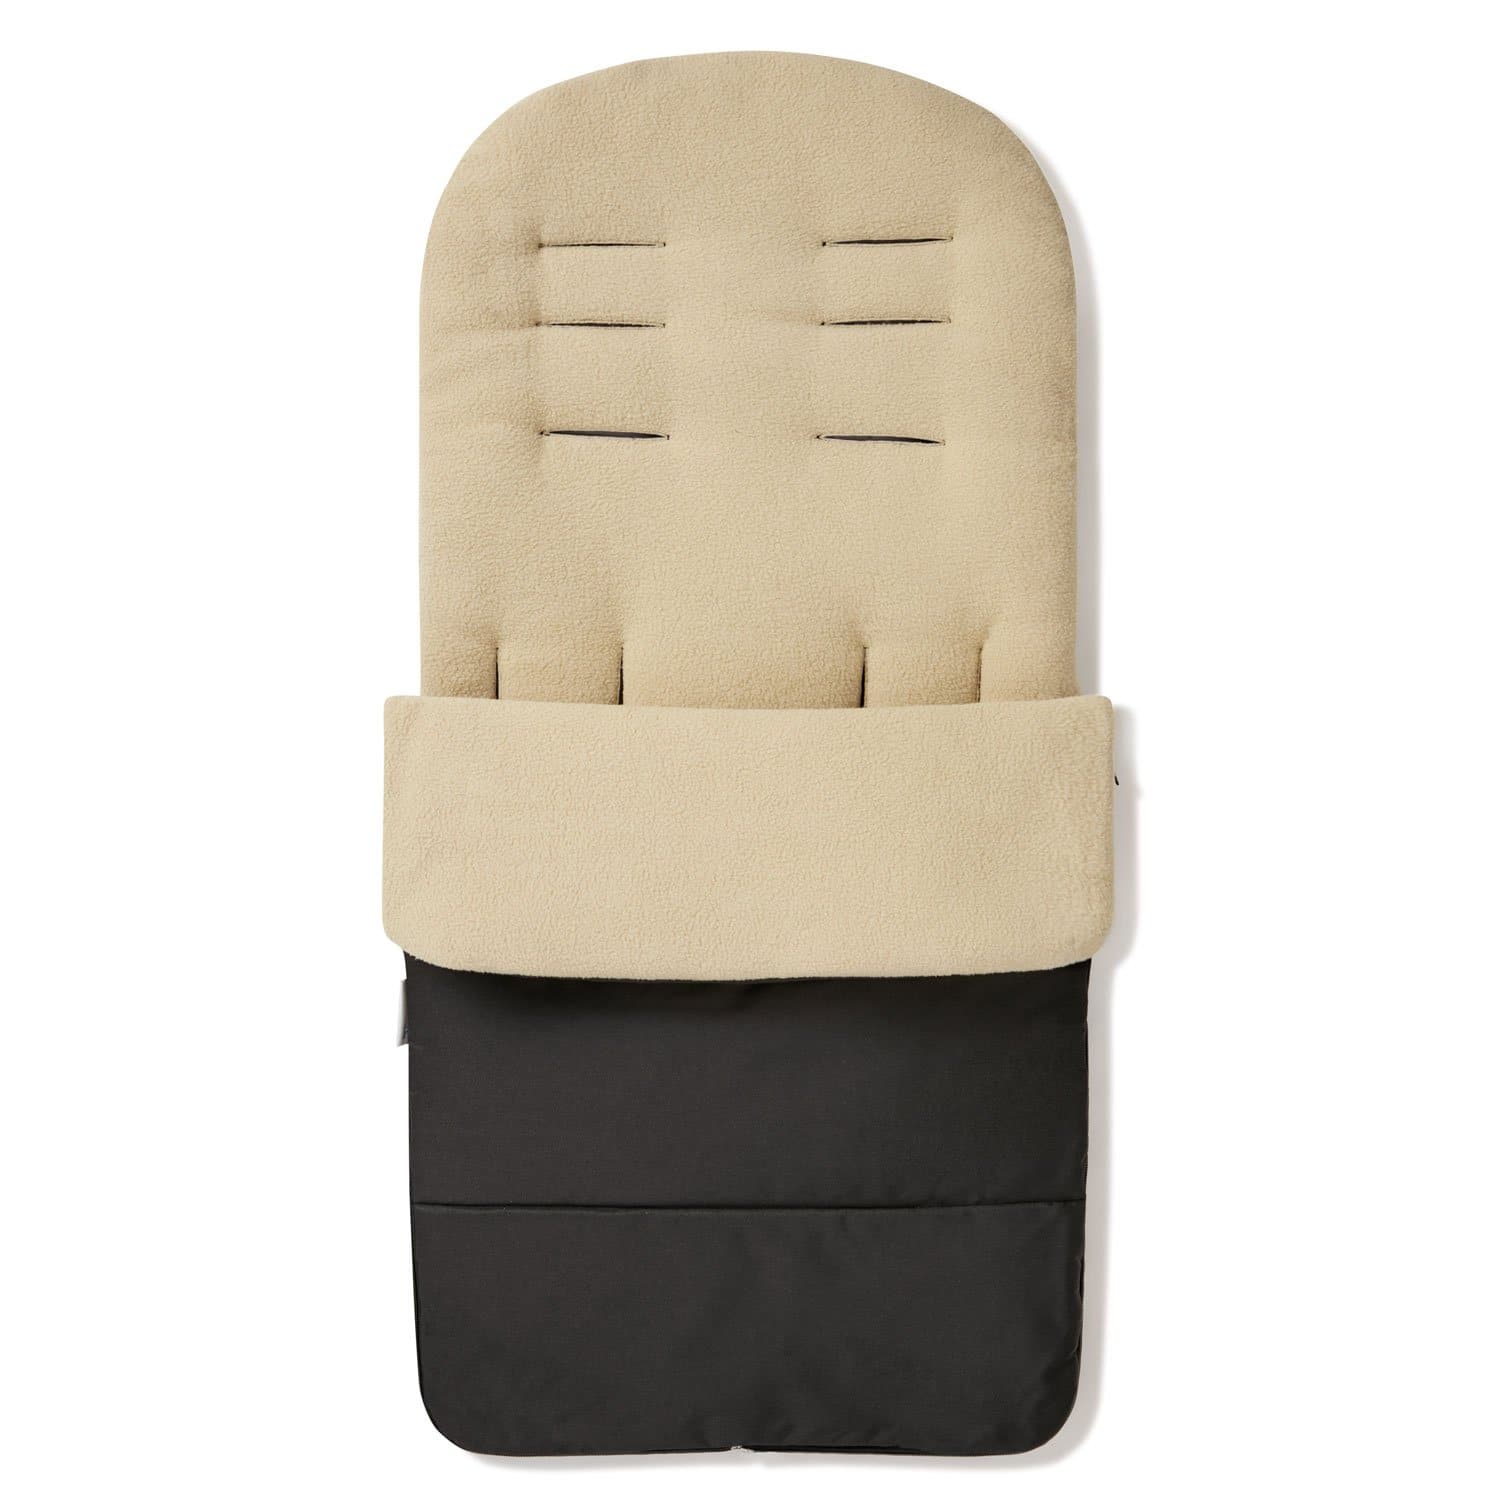 Premium Footmuff / Cosy Toes Compatible with Hauck - Desert Sand / Fits All Models | For Your Little One